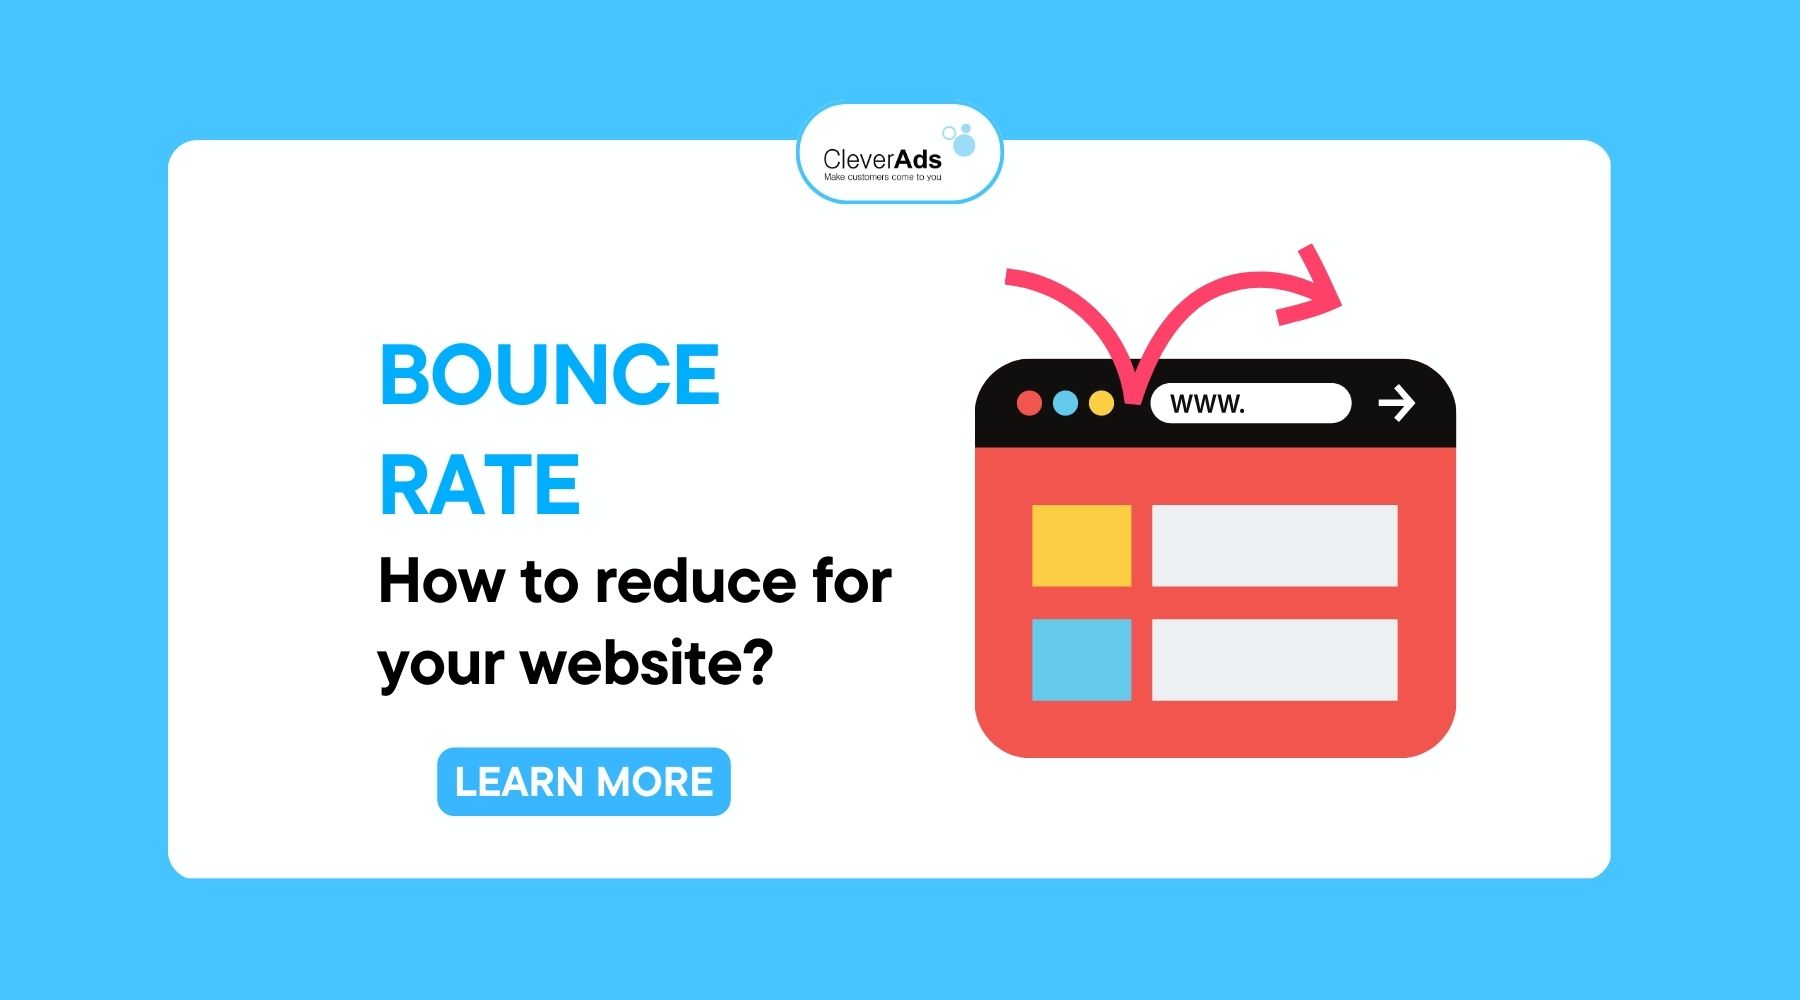 BOUNCE RATE: How to reduce for your website?